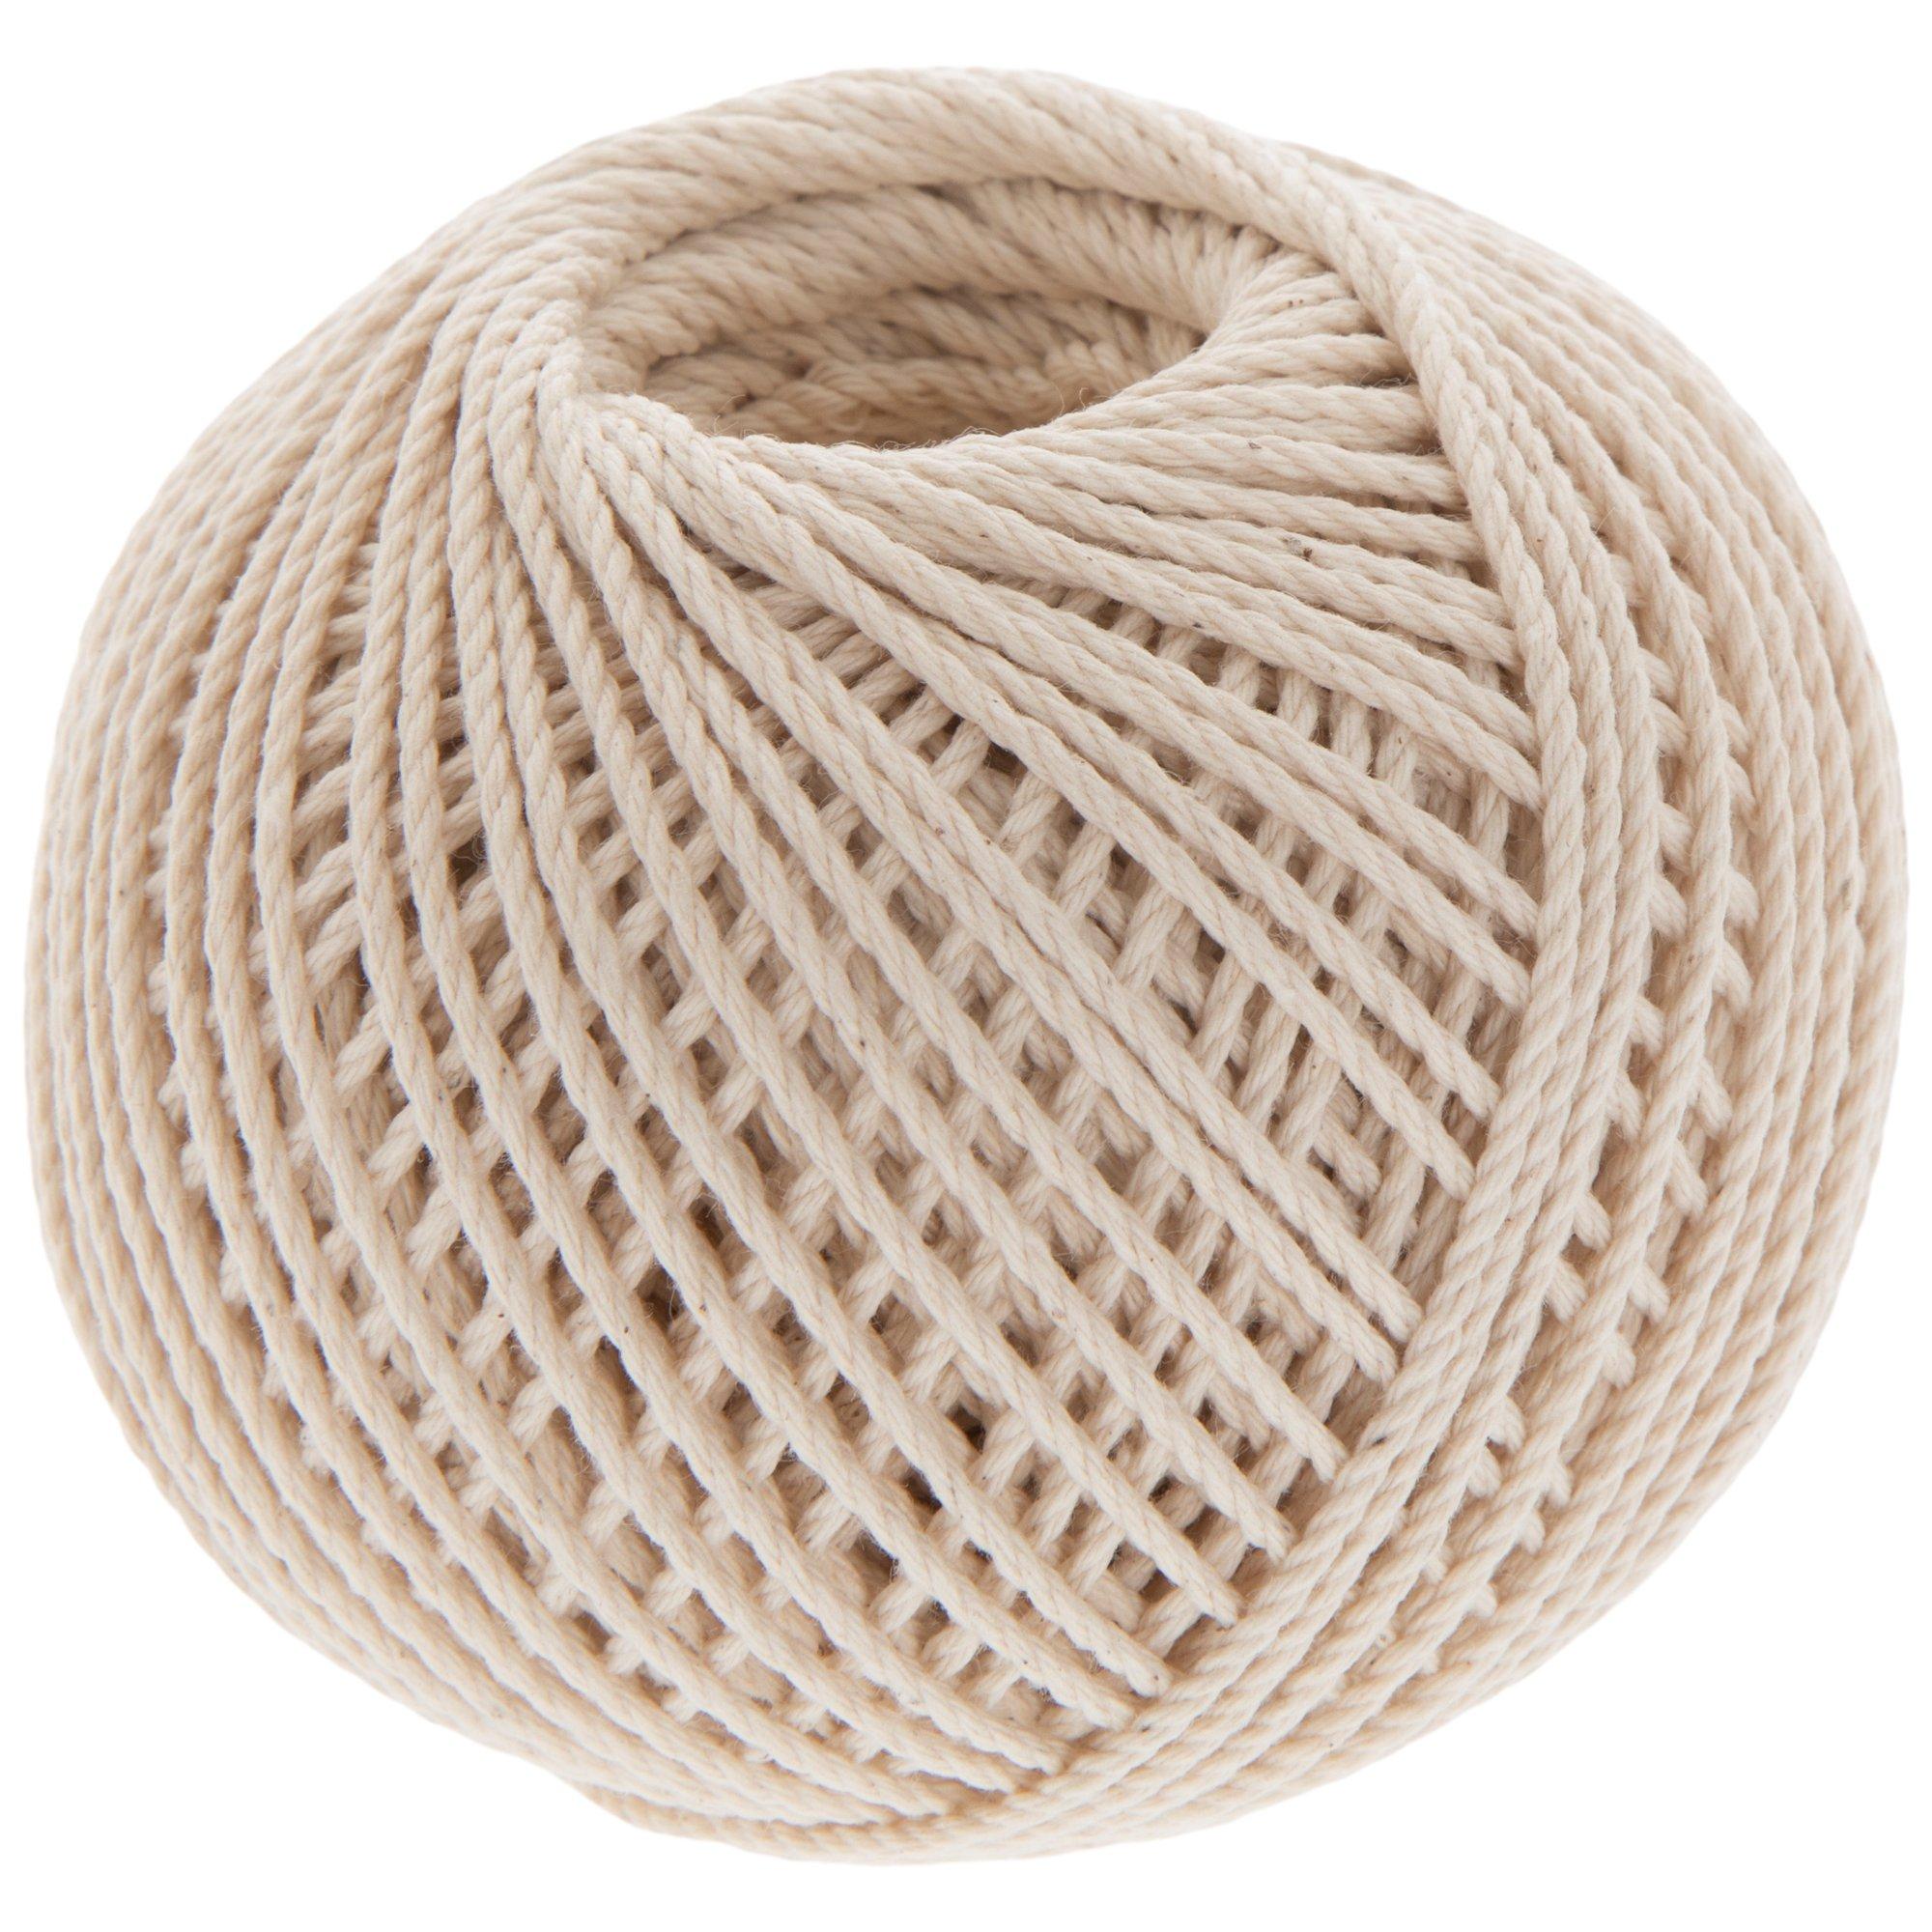 Natural Cotton Cord - 1.5mm, Hobby Lobby